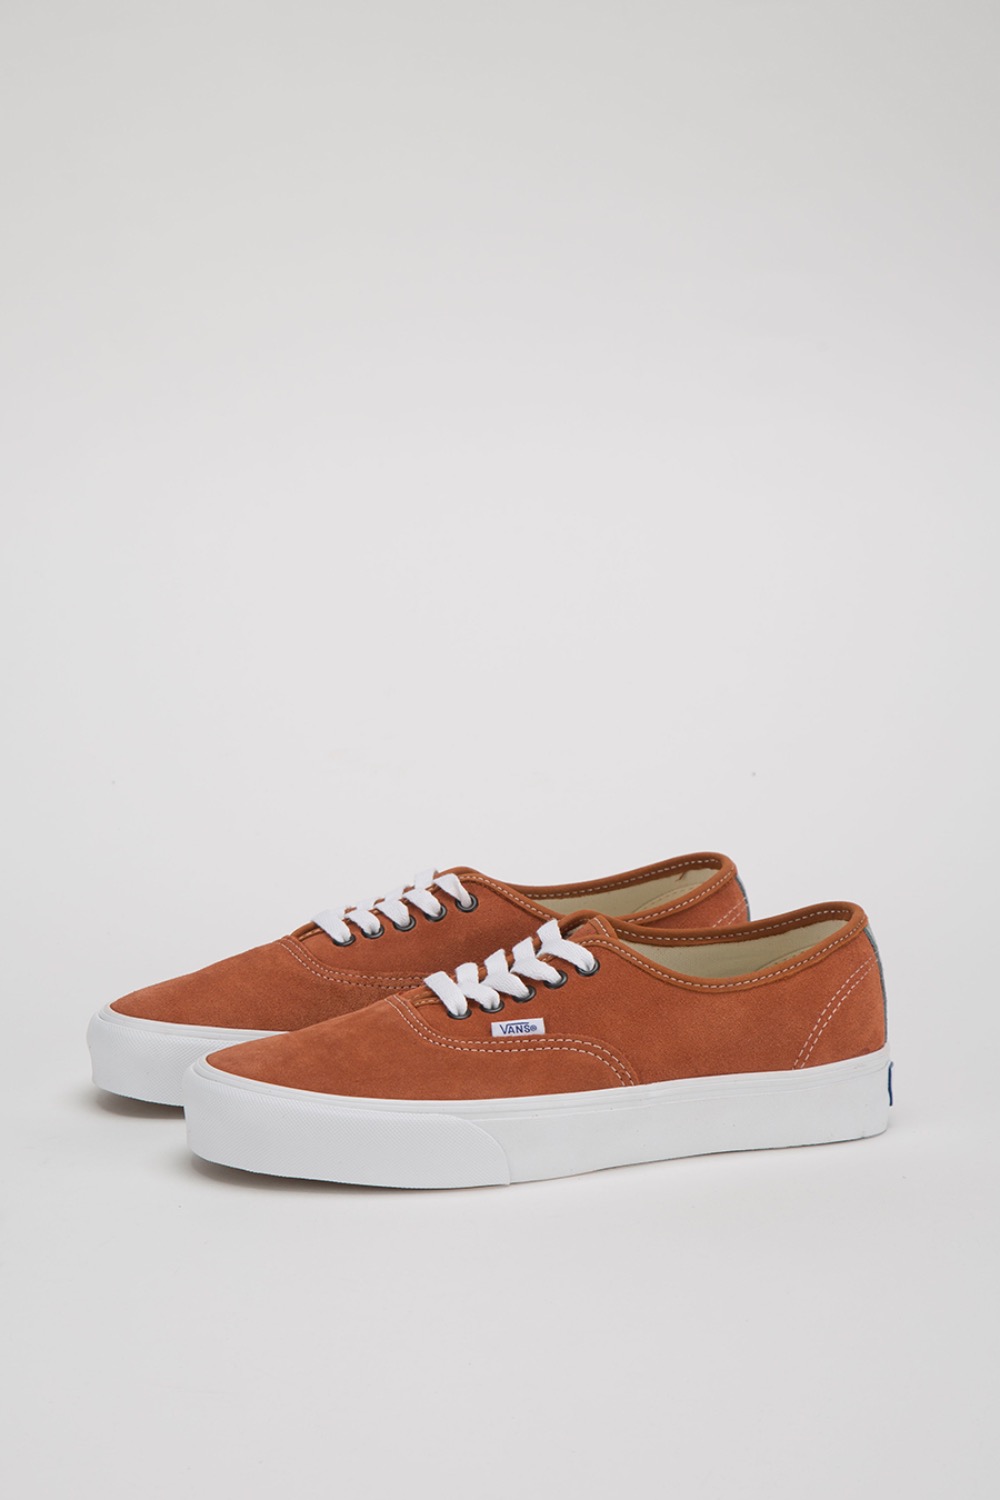 AUTHENTIC VR3 LX(SUEDE) BOMBAY BROWN/GREEN MILIEU